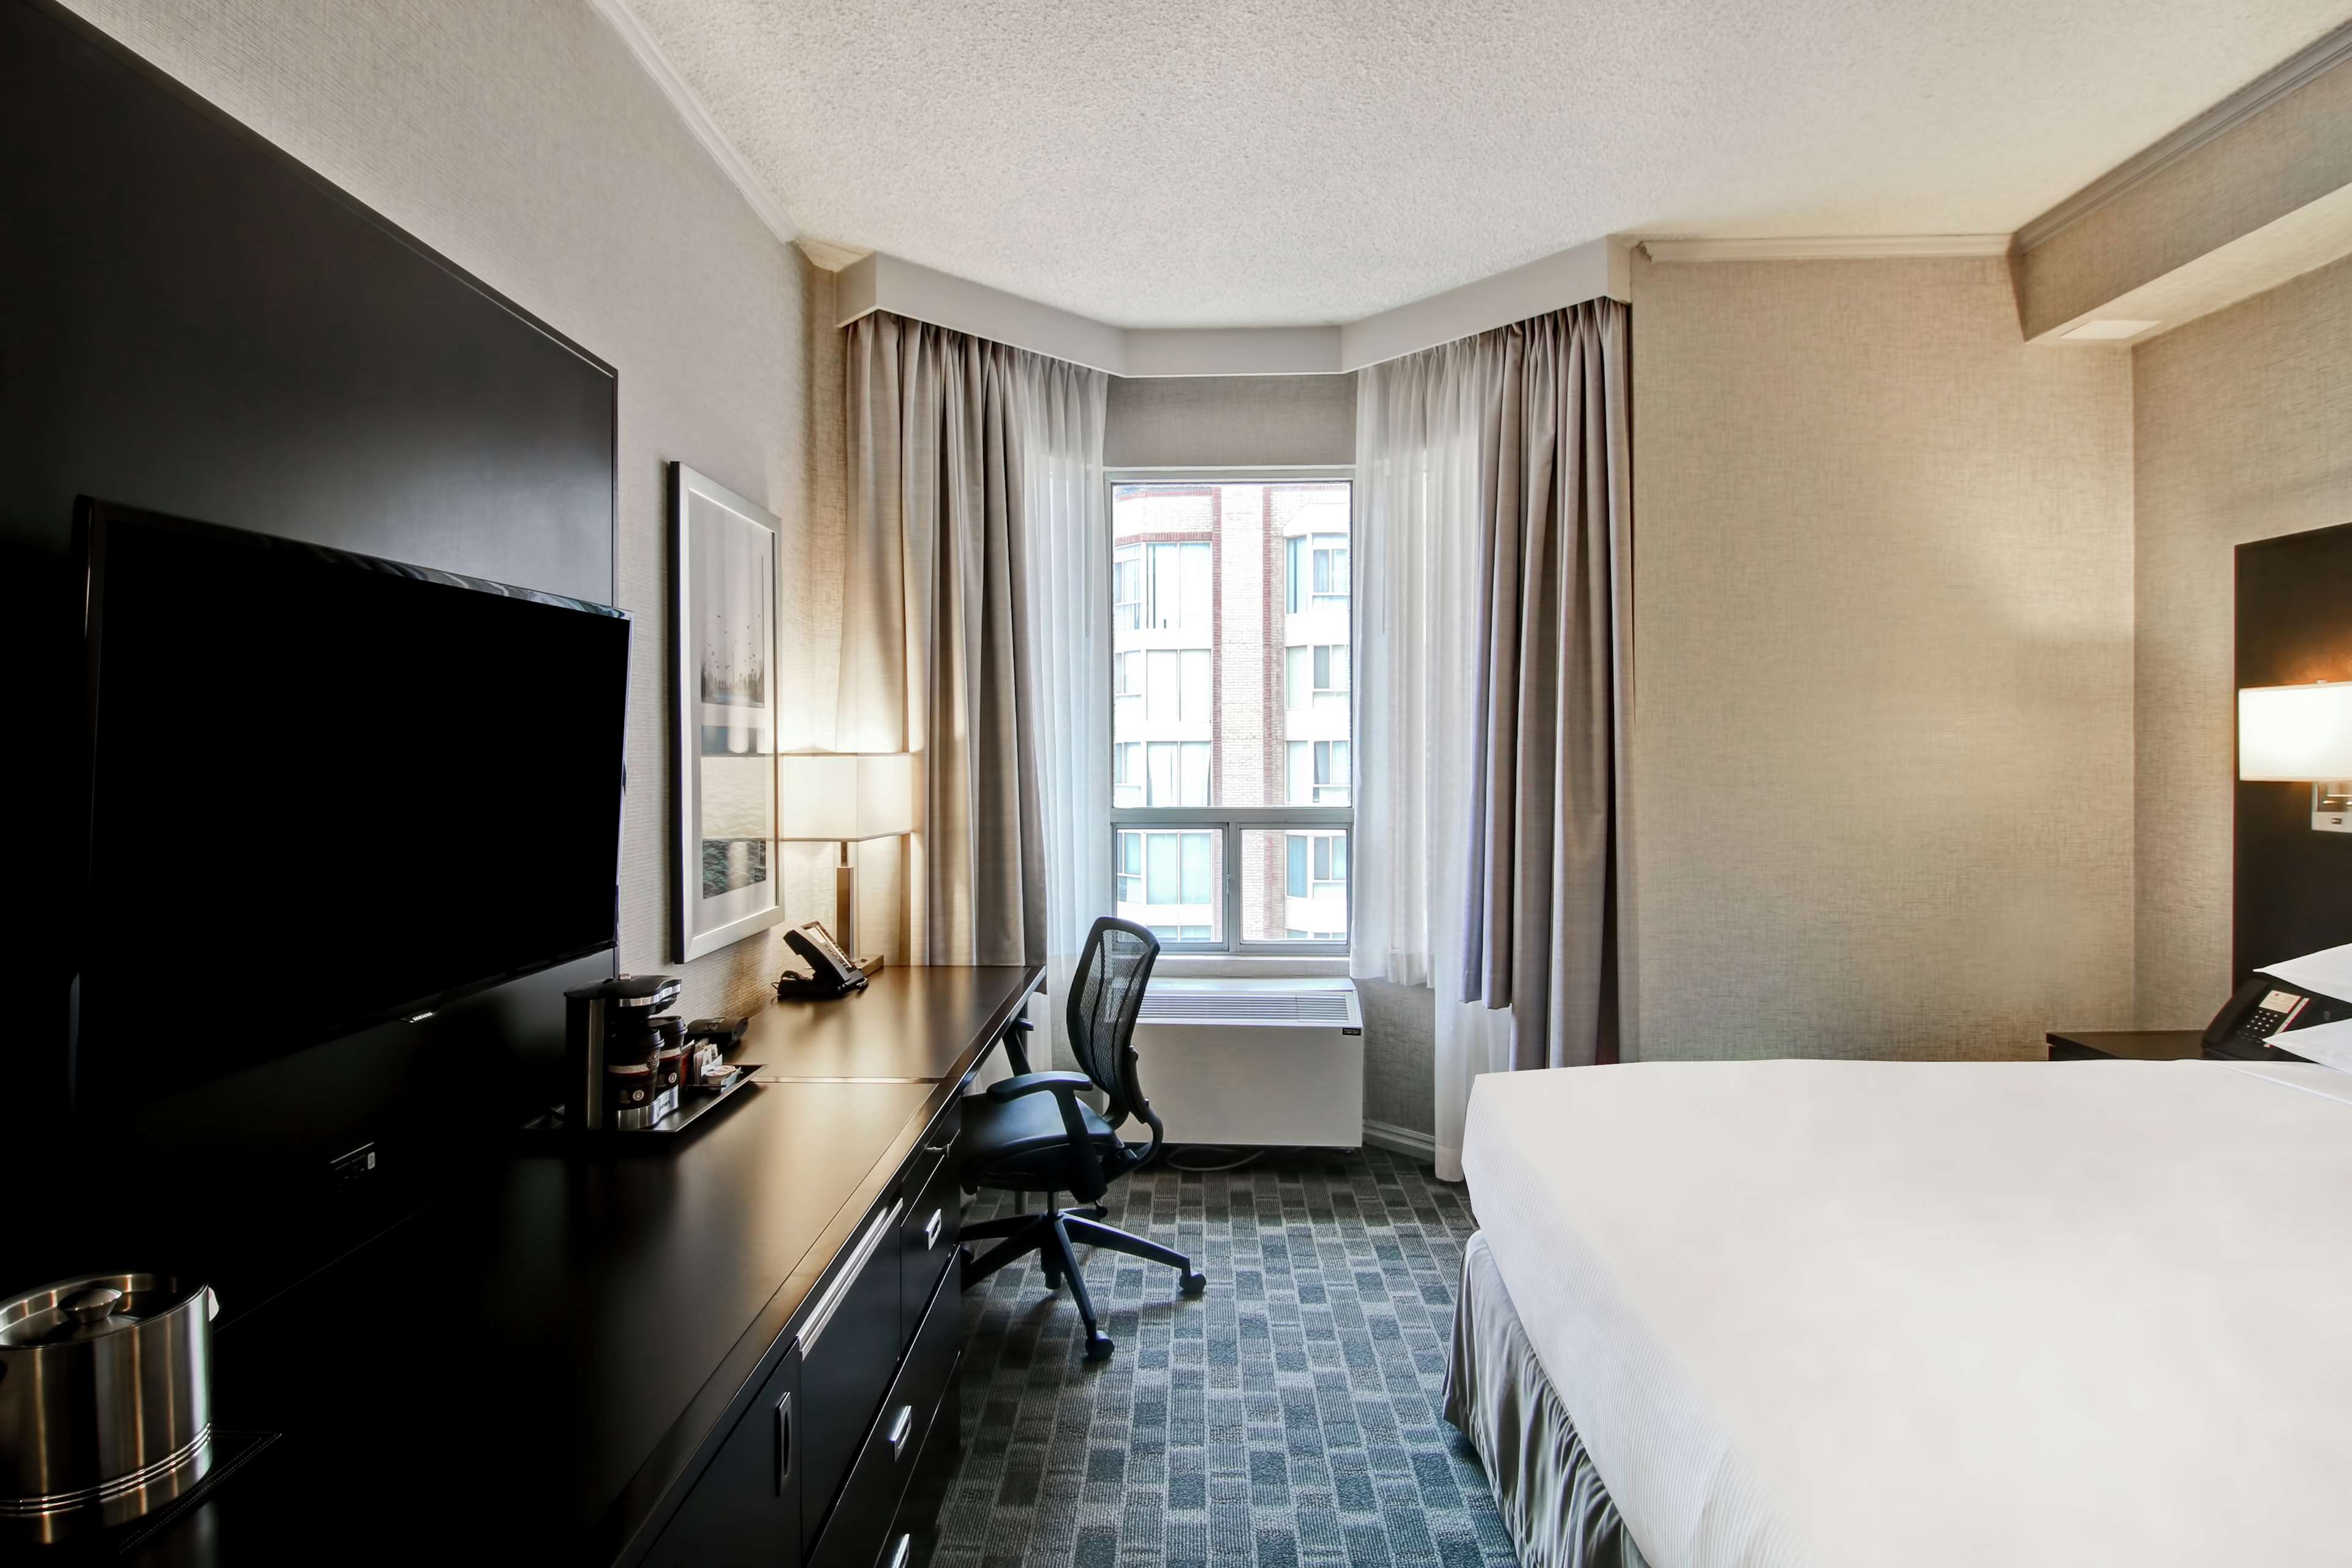 Images DoubleTree by Hilton Hotel Toronto Downtown